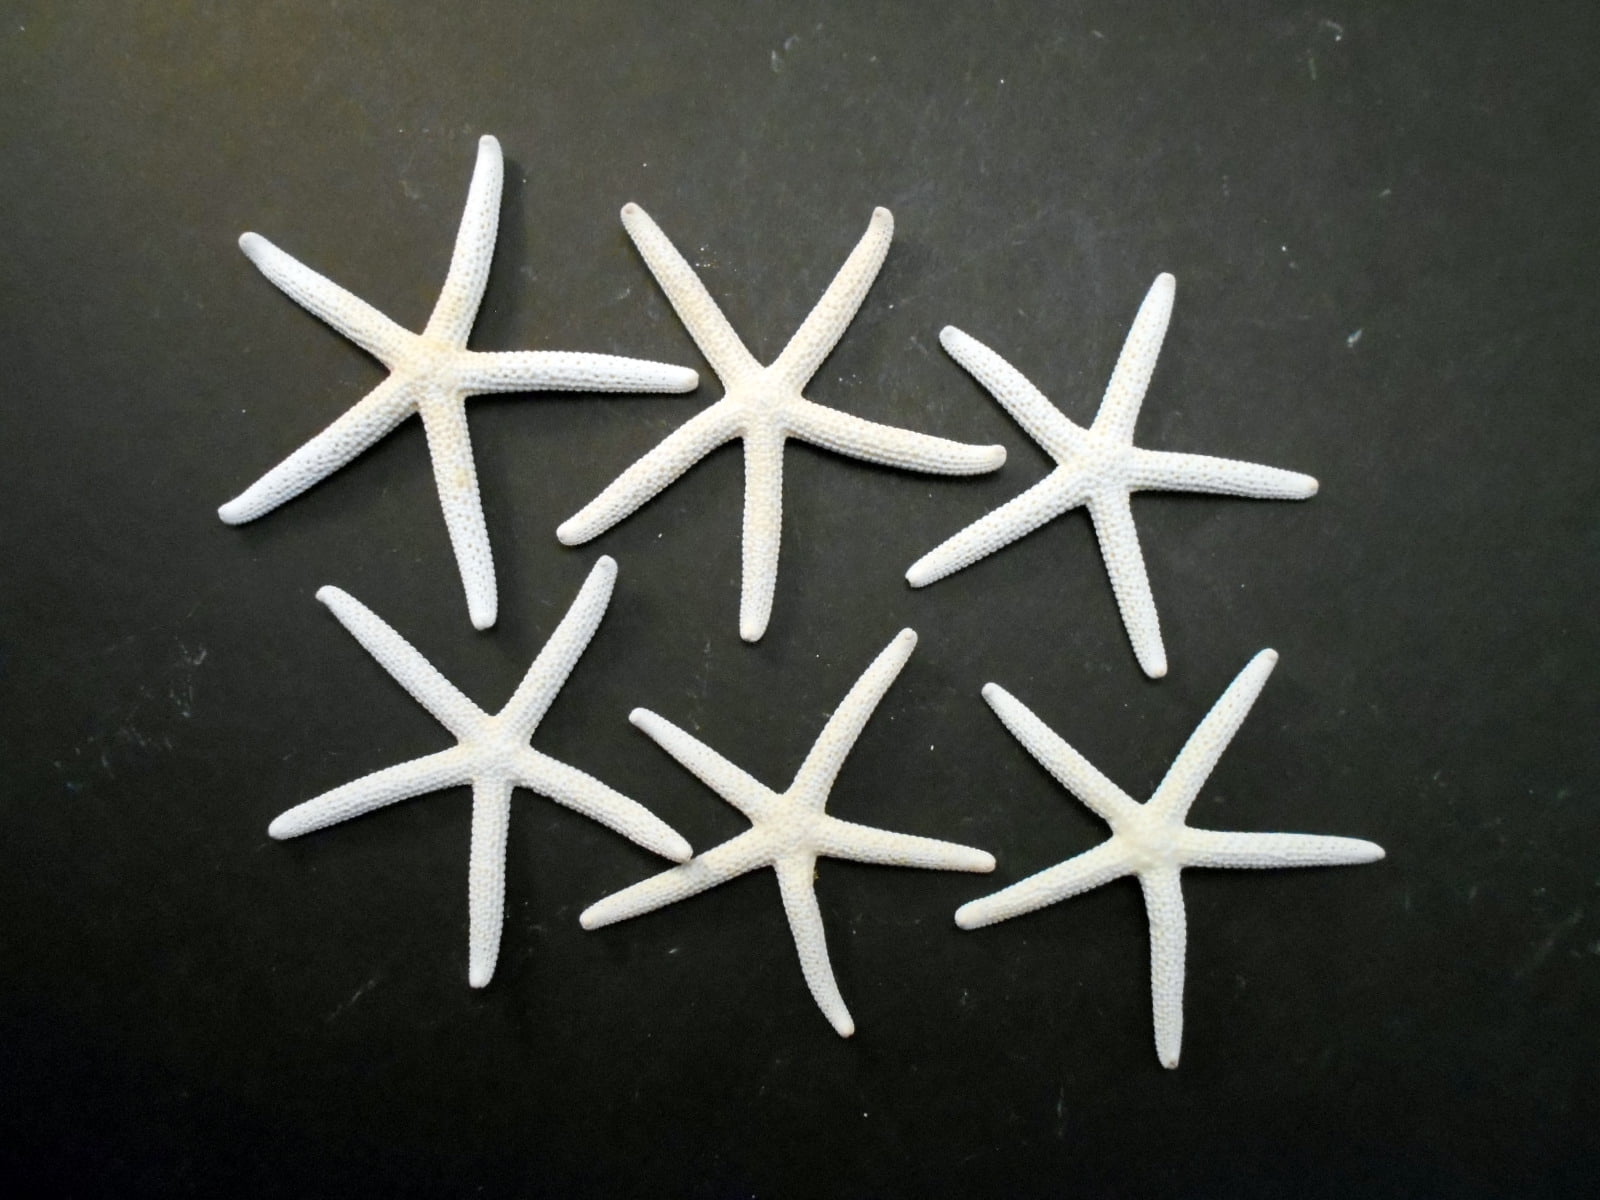 4-6 Pencil Starfish for Wedding or Home Decor Craft Supplies Turquoise Natural Pencil Starfish for Beach or Nautical Decor